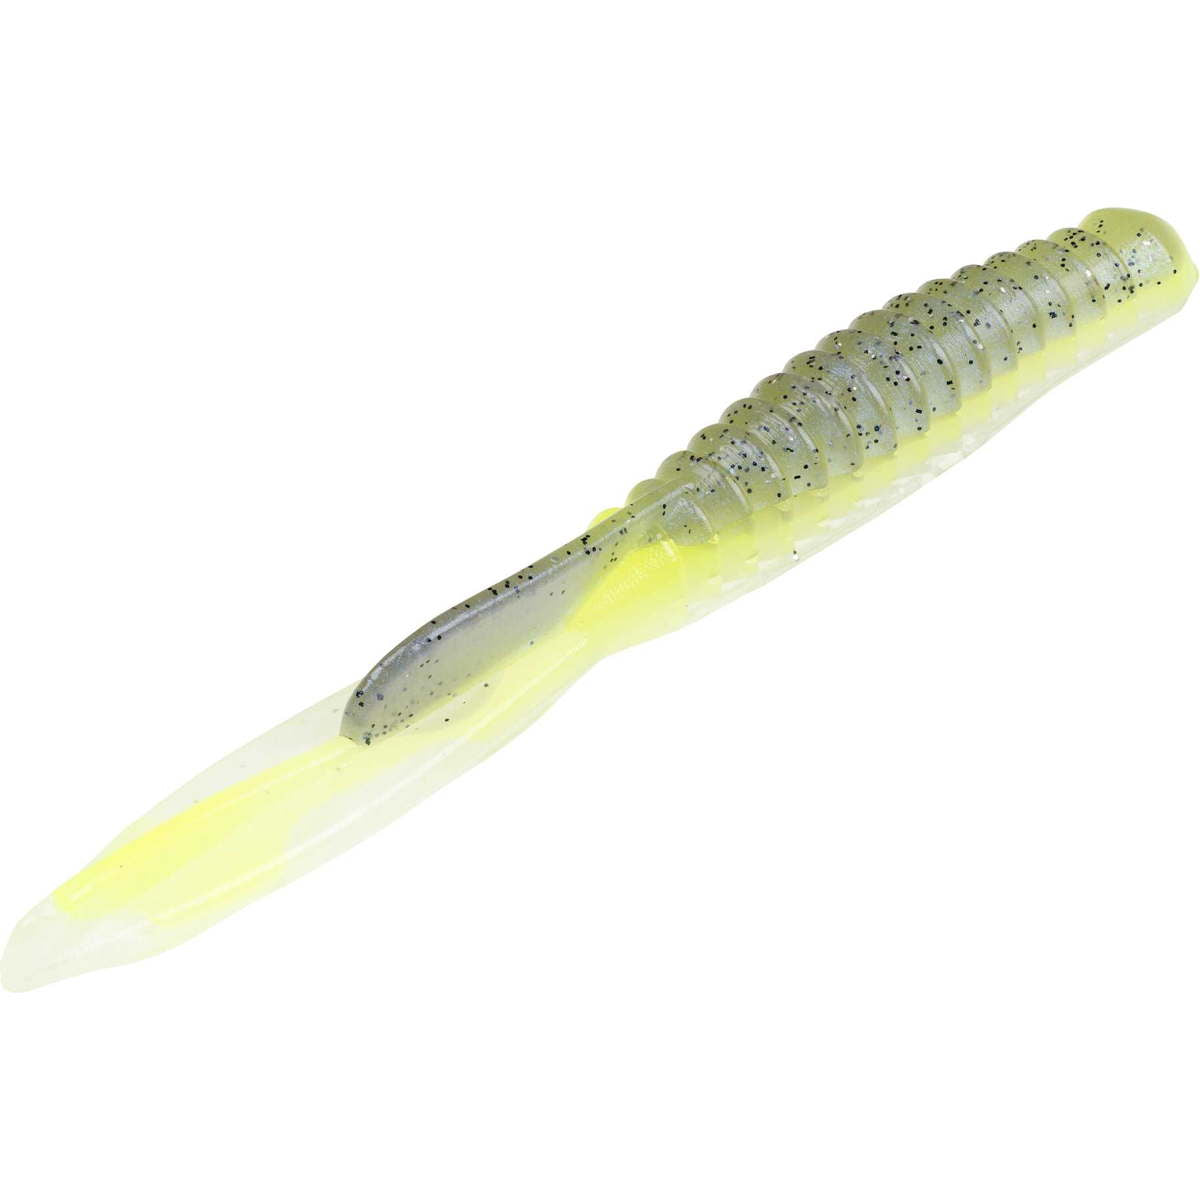 Photo of Strike King KVD Perfect Plastic Drop Shot Half Shell OPT for sale at United Tackle Shops.